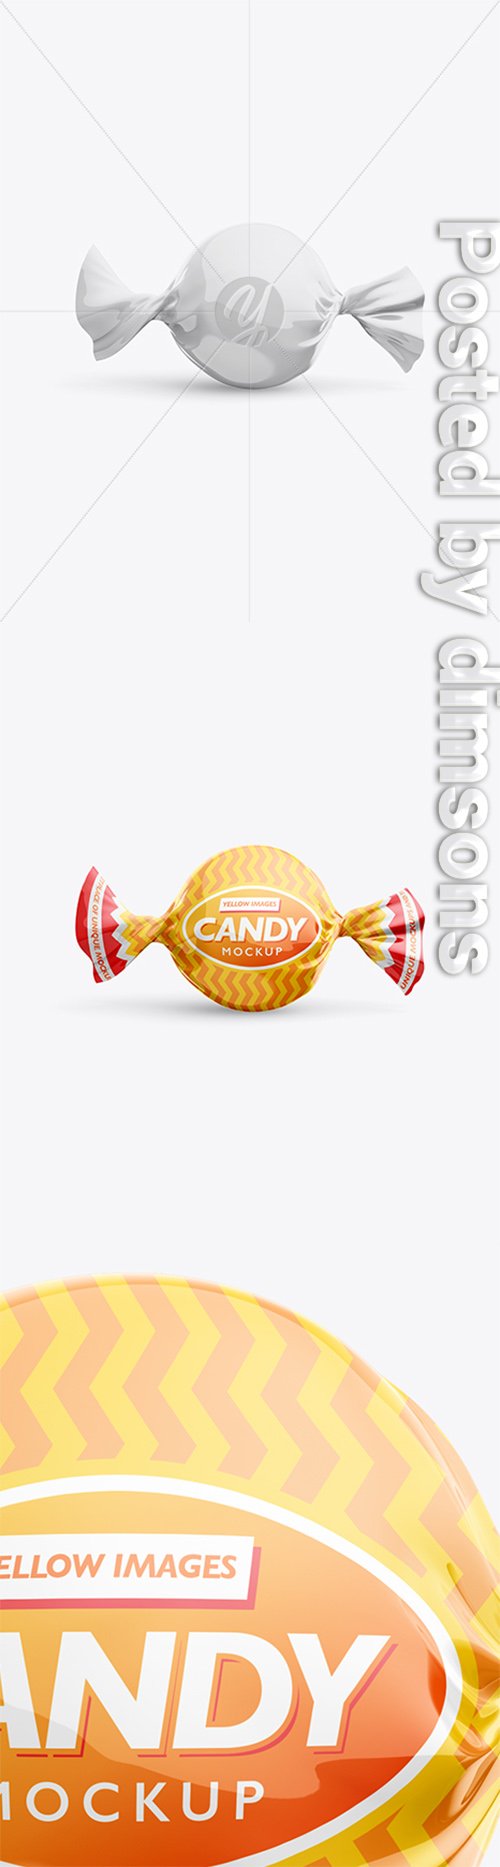 Candy Mockup - Front View 25828 TIF